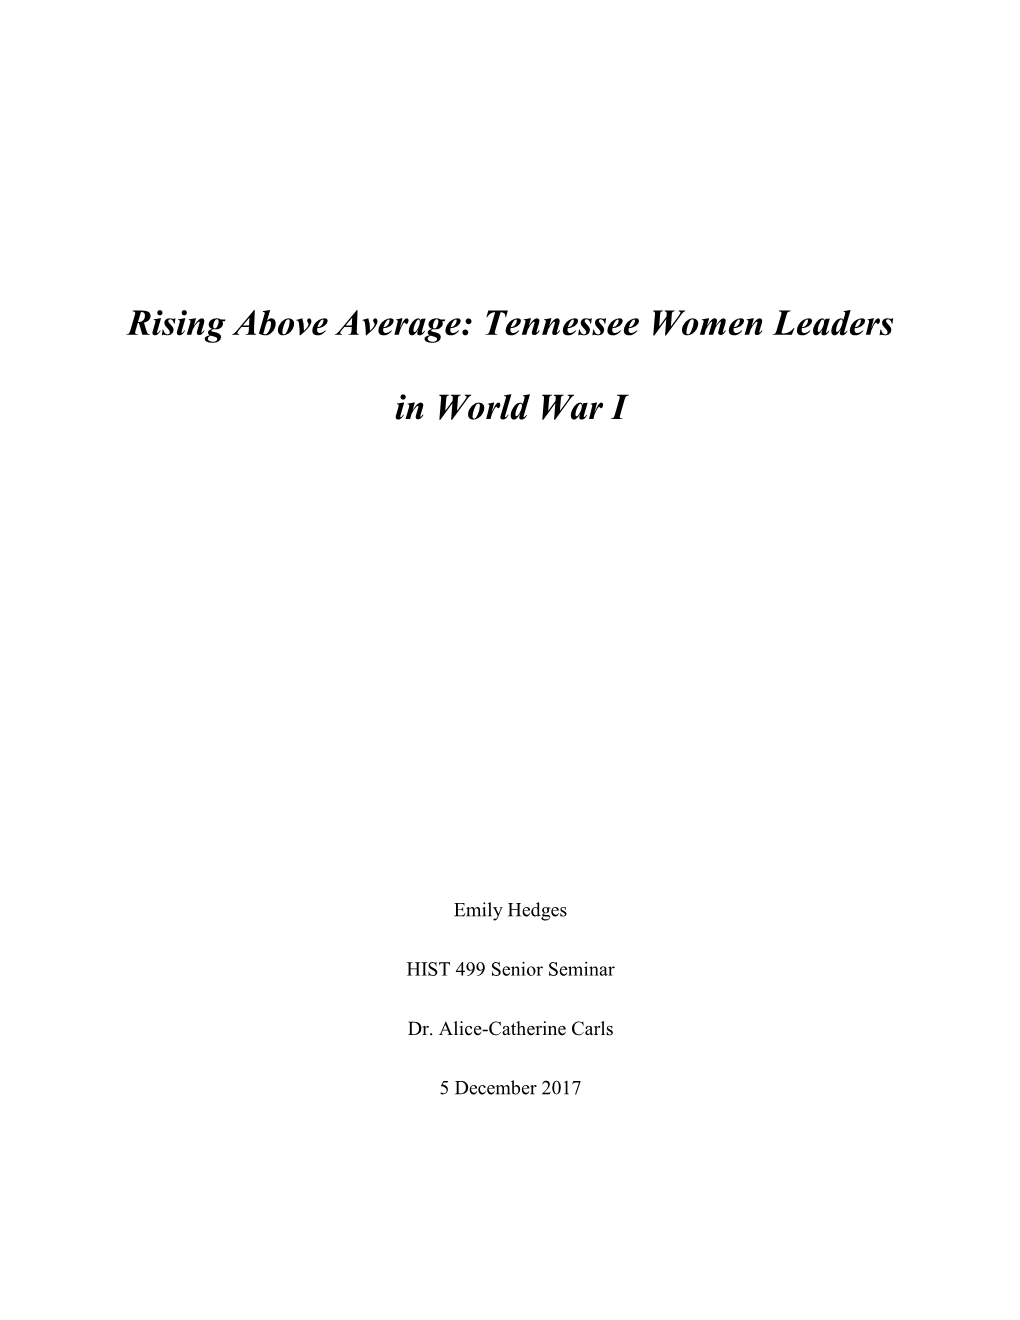 Rising Above Average: Tennessee Women Leaders in World War I